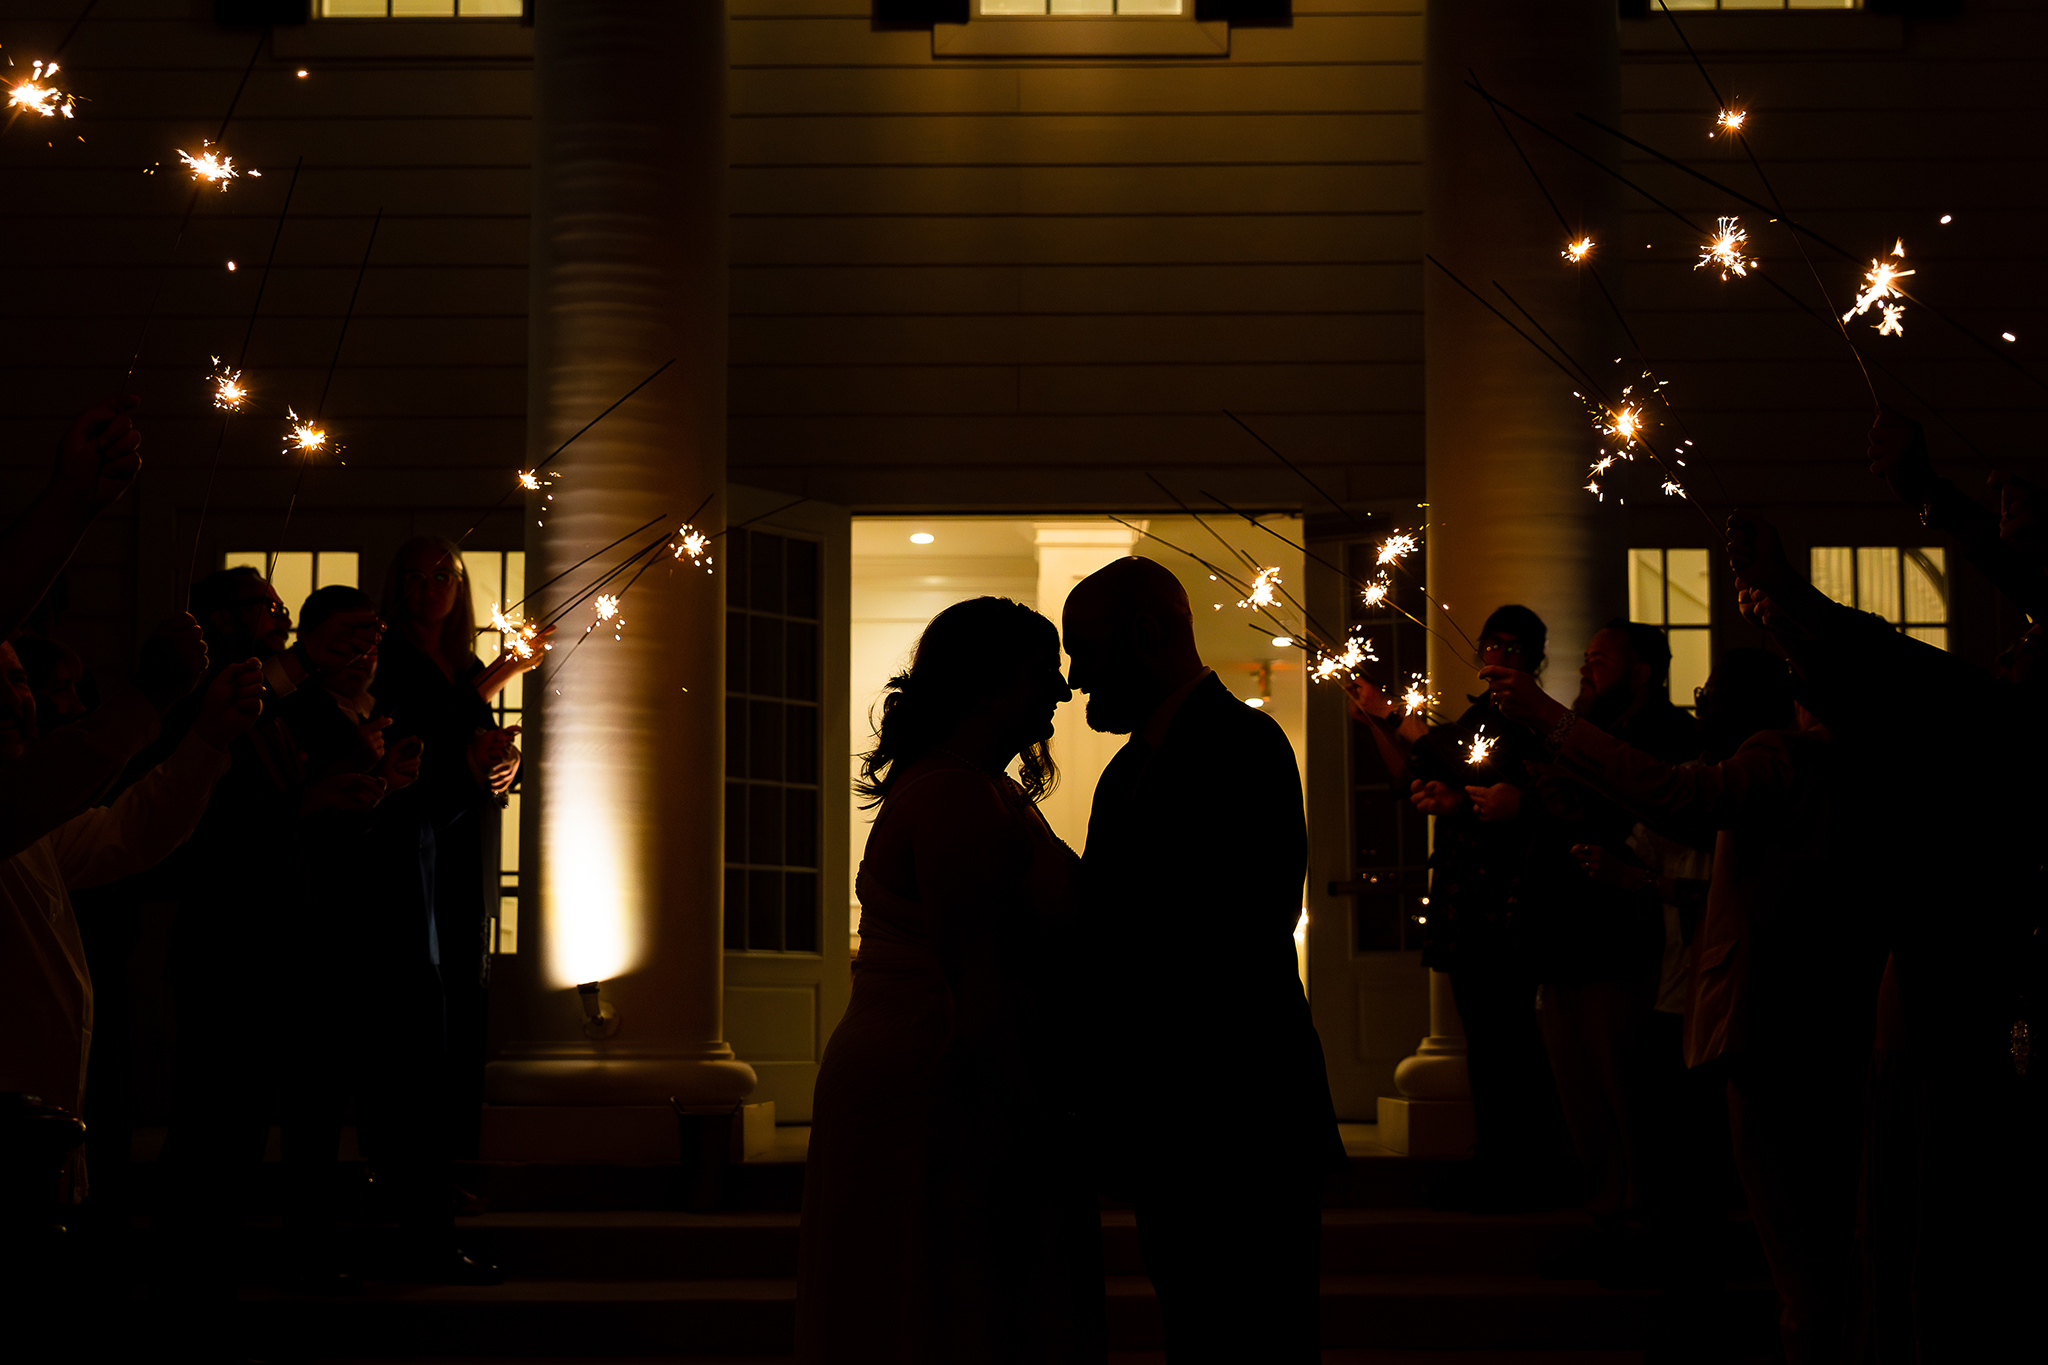 Silhouette photo of bride and groom surrounded by sparklers against milestone denton wedding venue by Stefani Ciotti Photography a dallas wedding photographer